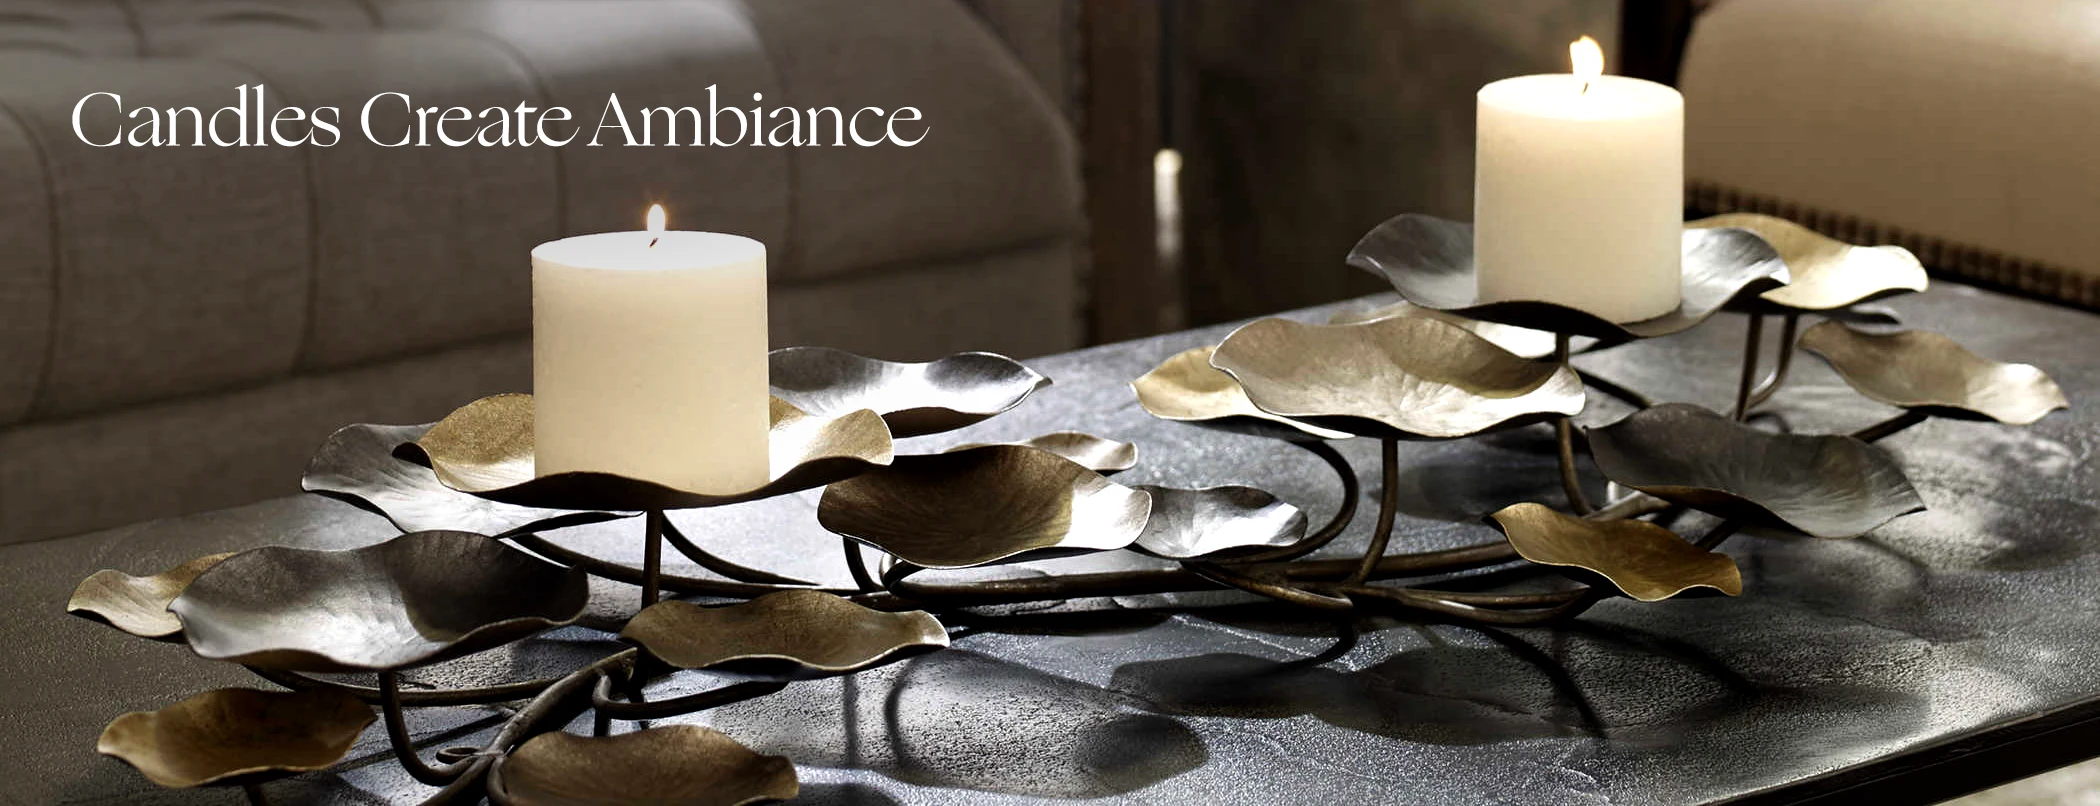 Shop our collection of candle holders and scented candles.